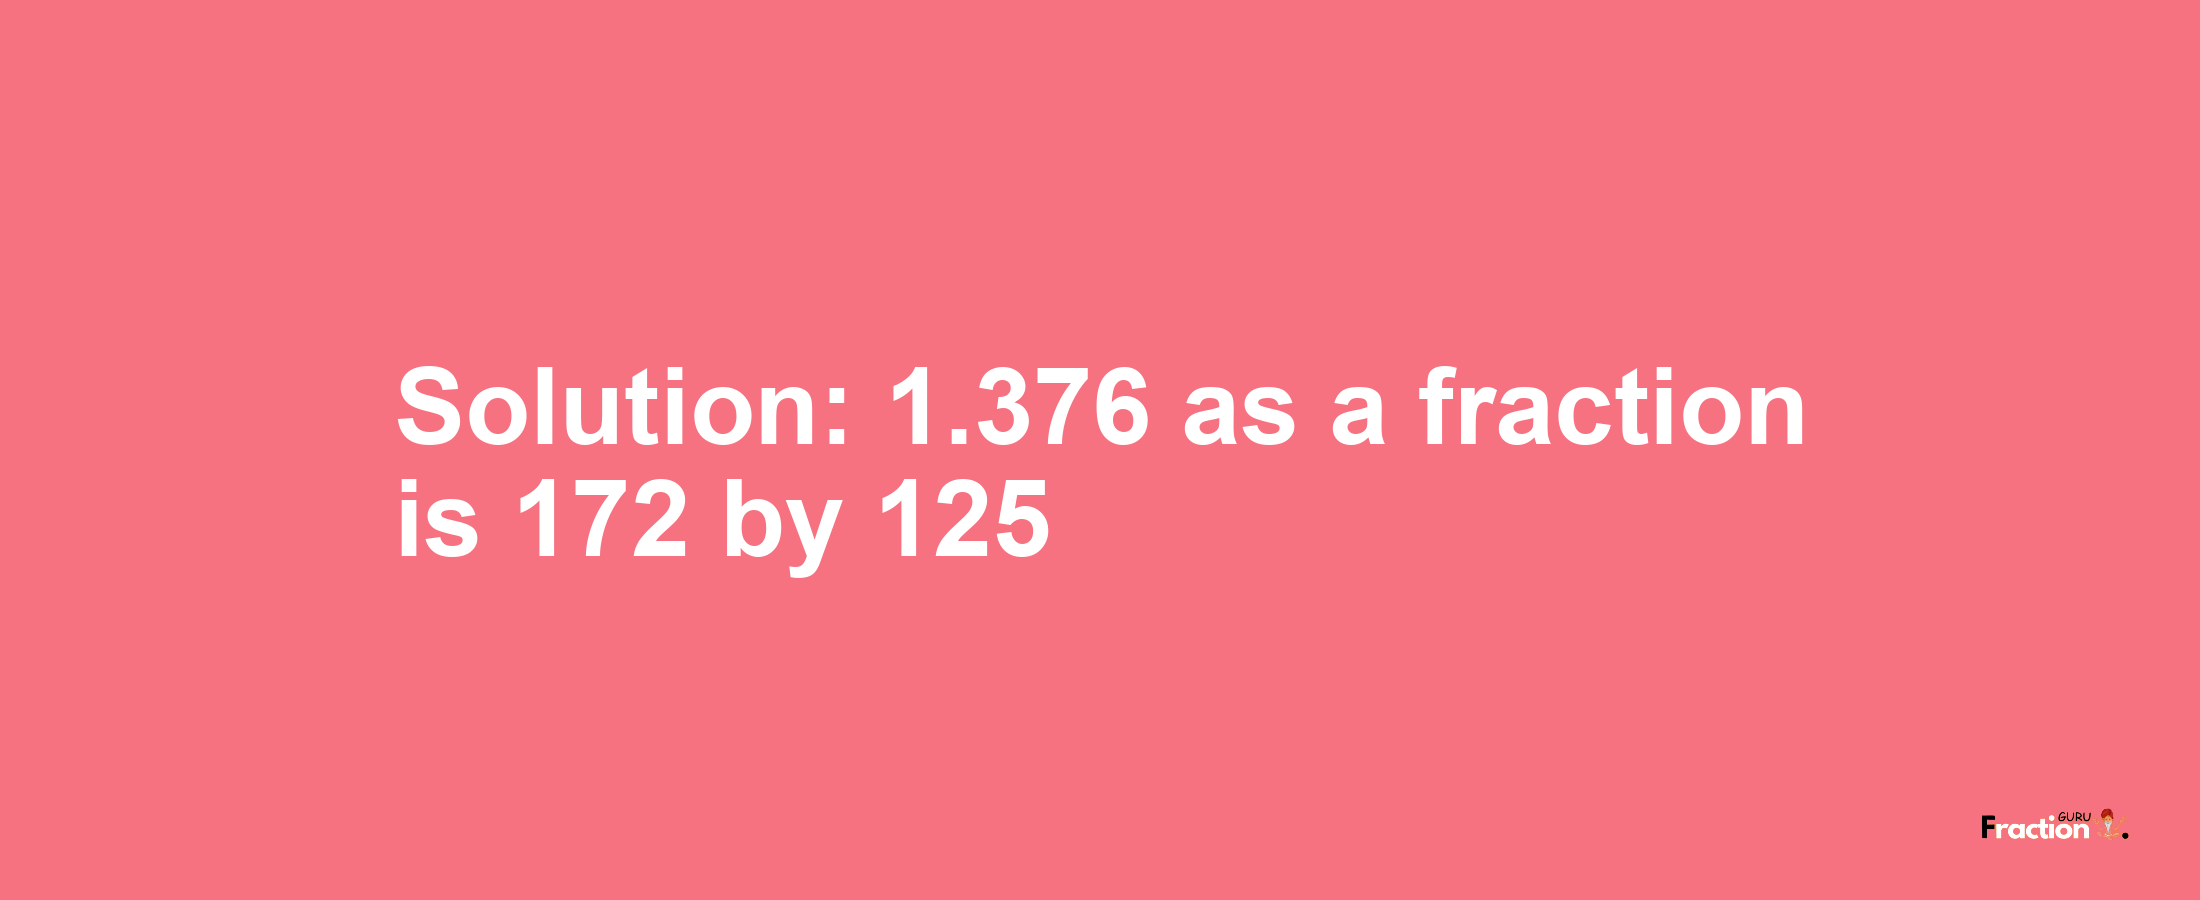 Solution:1.376 as a fraction is 172/125